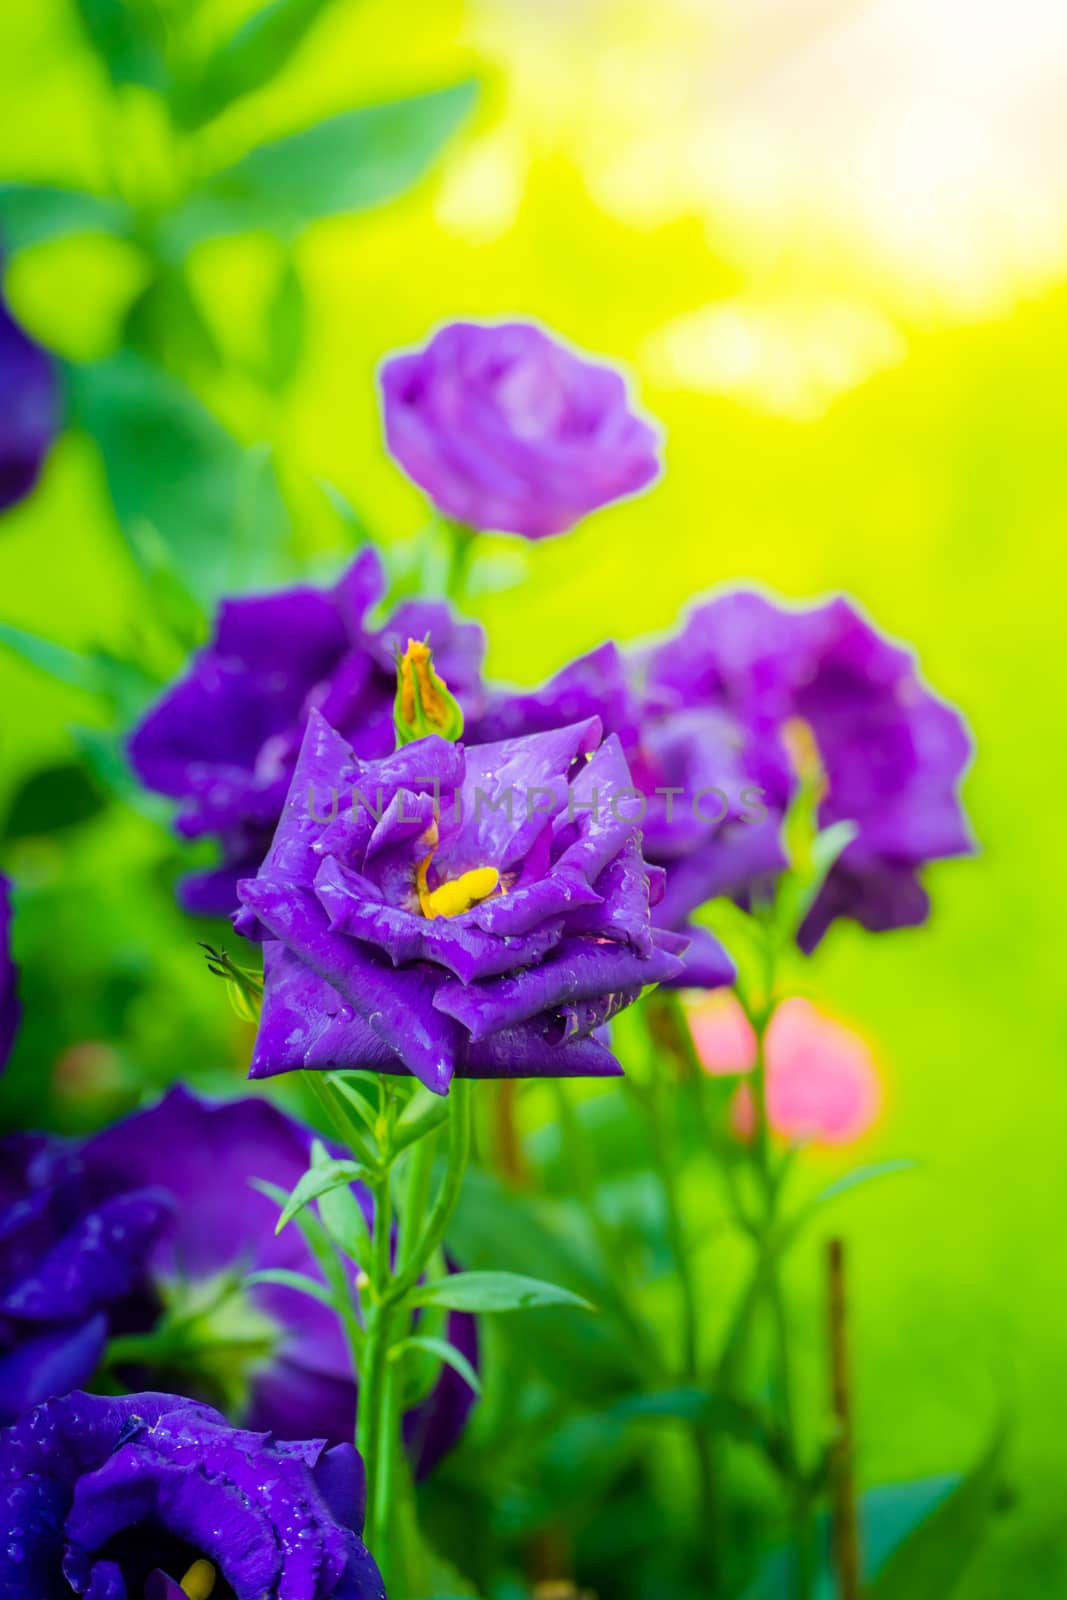 Some purple yellow roses in the garden by teerawit